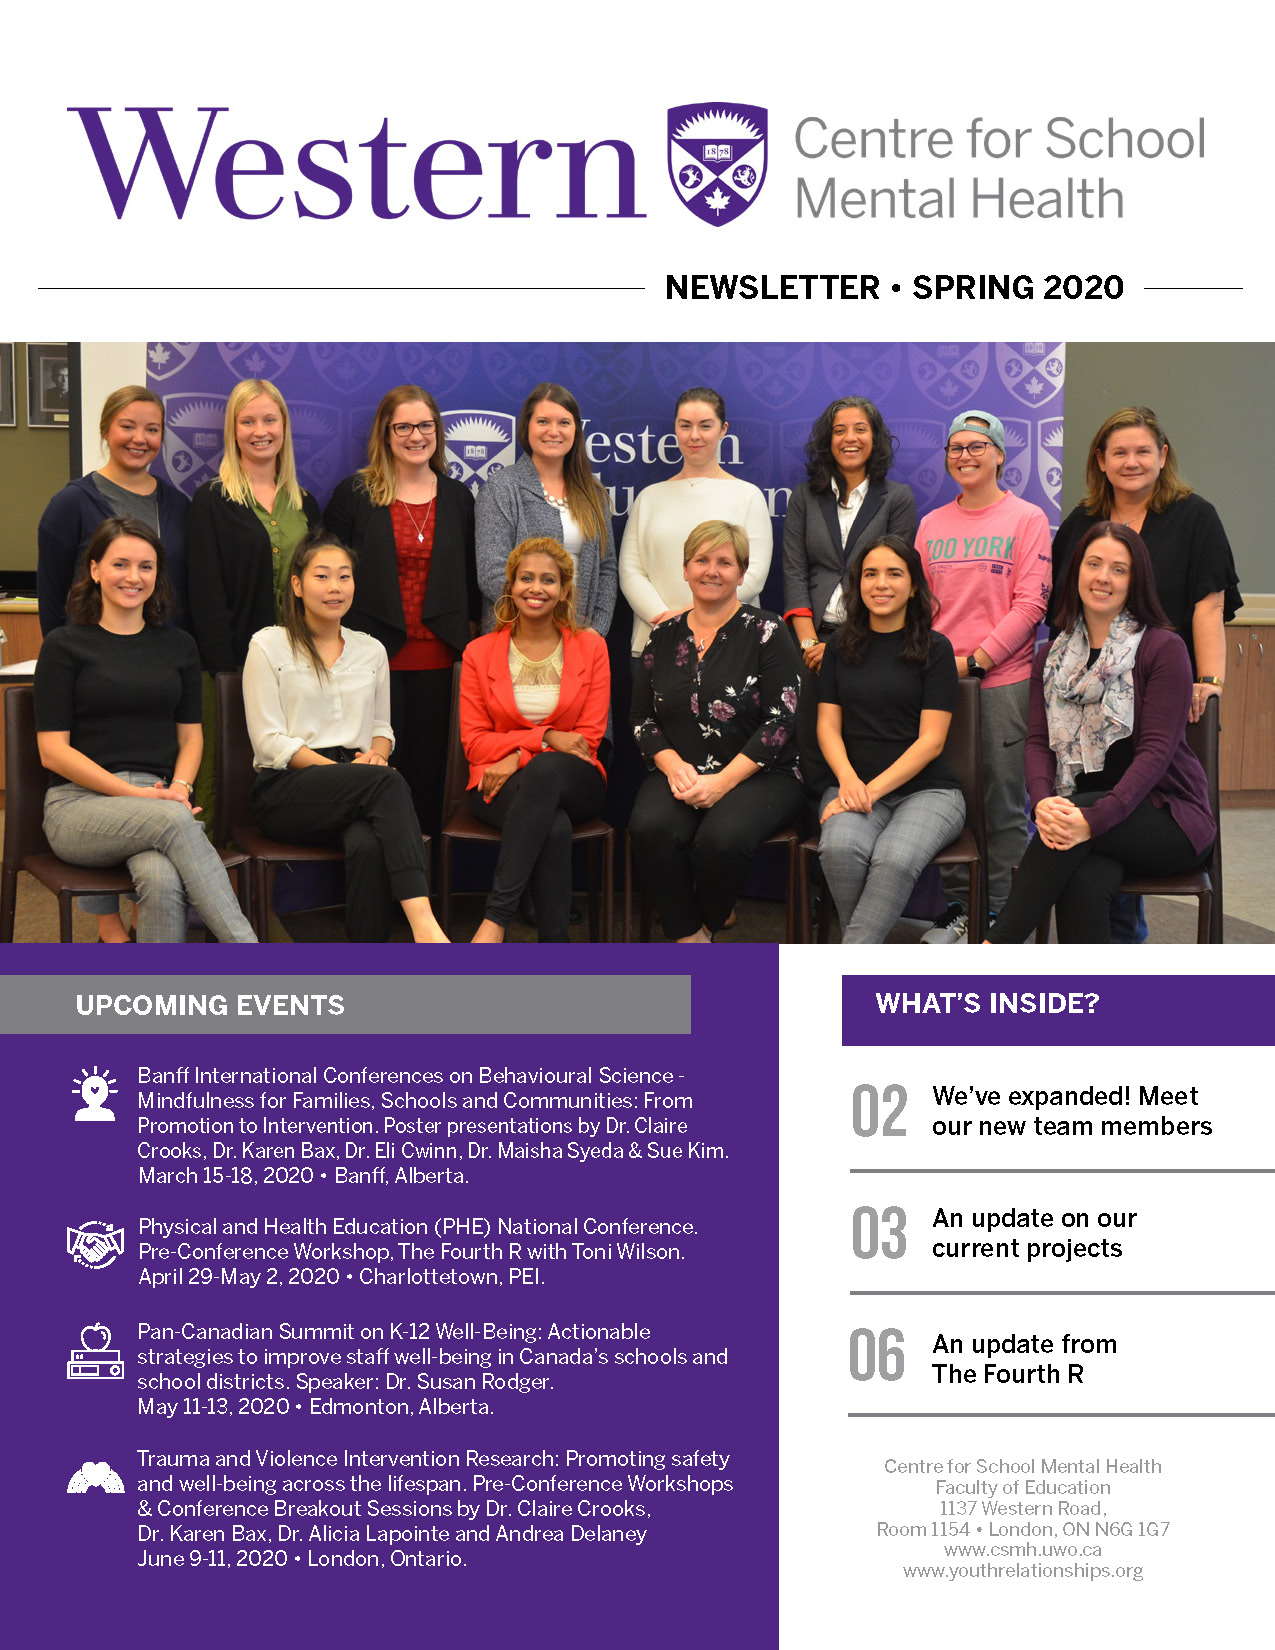 Preview of the Spring 2020 Newsletter